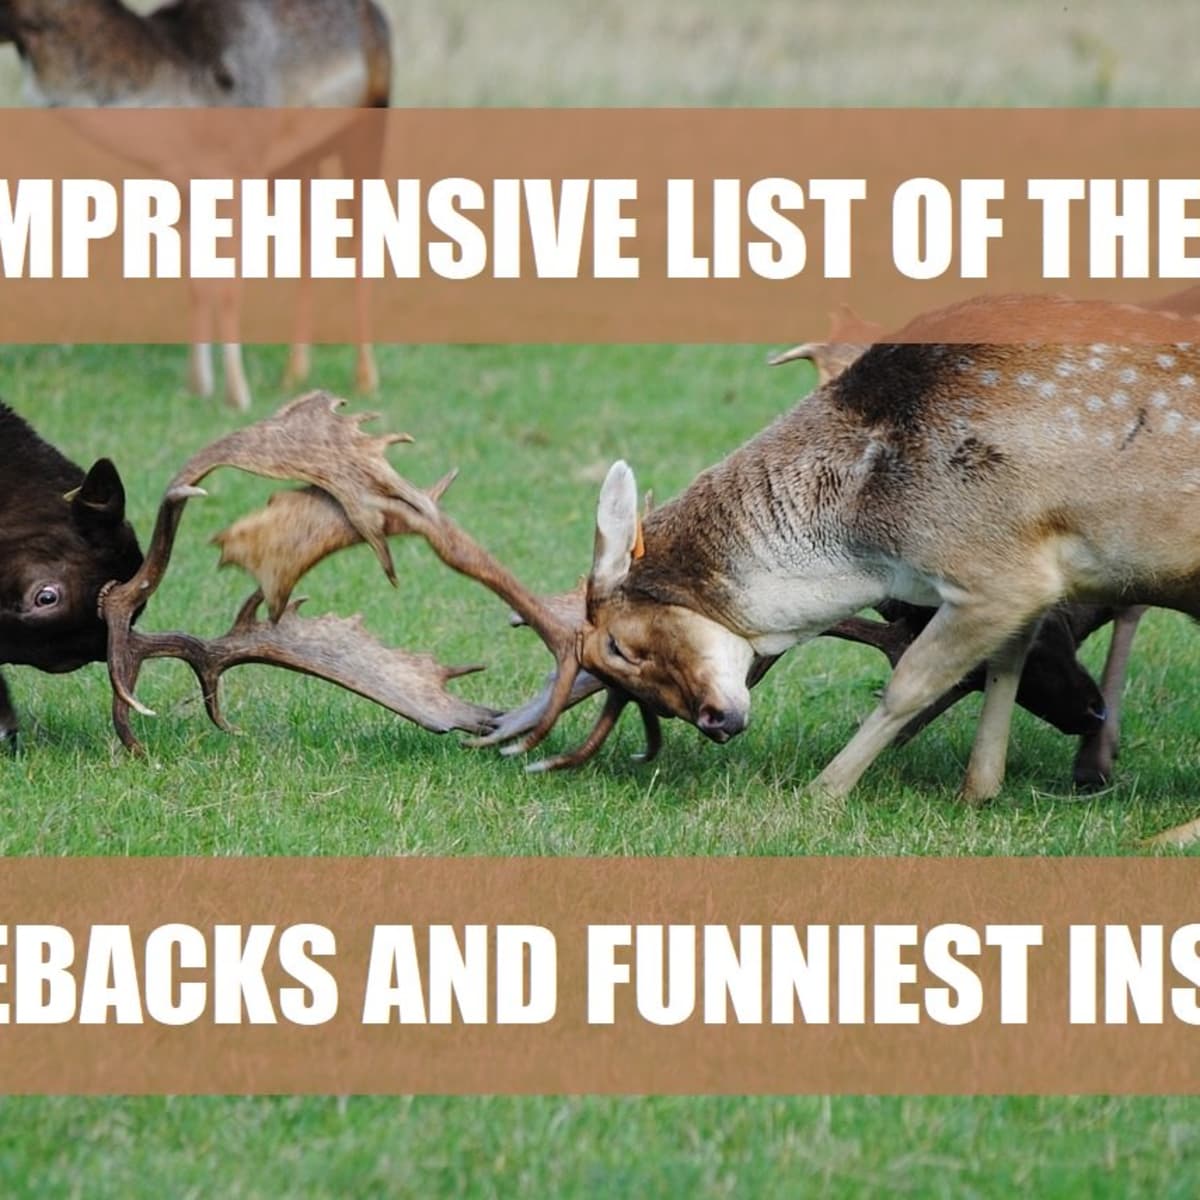 200+ Best Comebacks, Funny Insults, and Savage Roasts - PairedLife